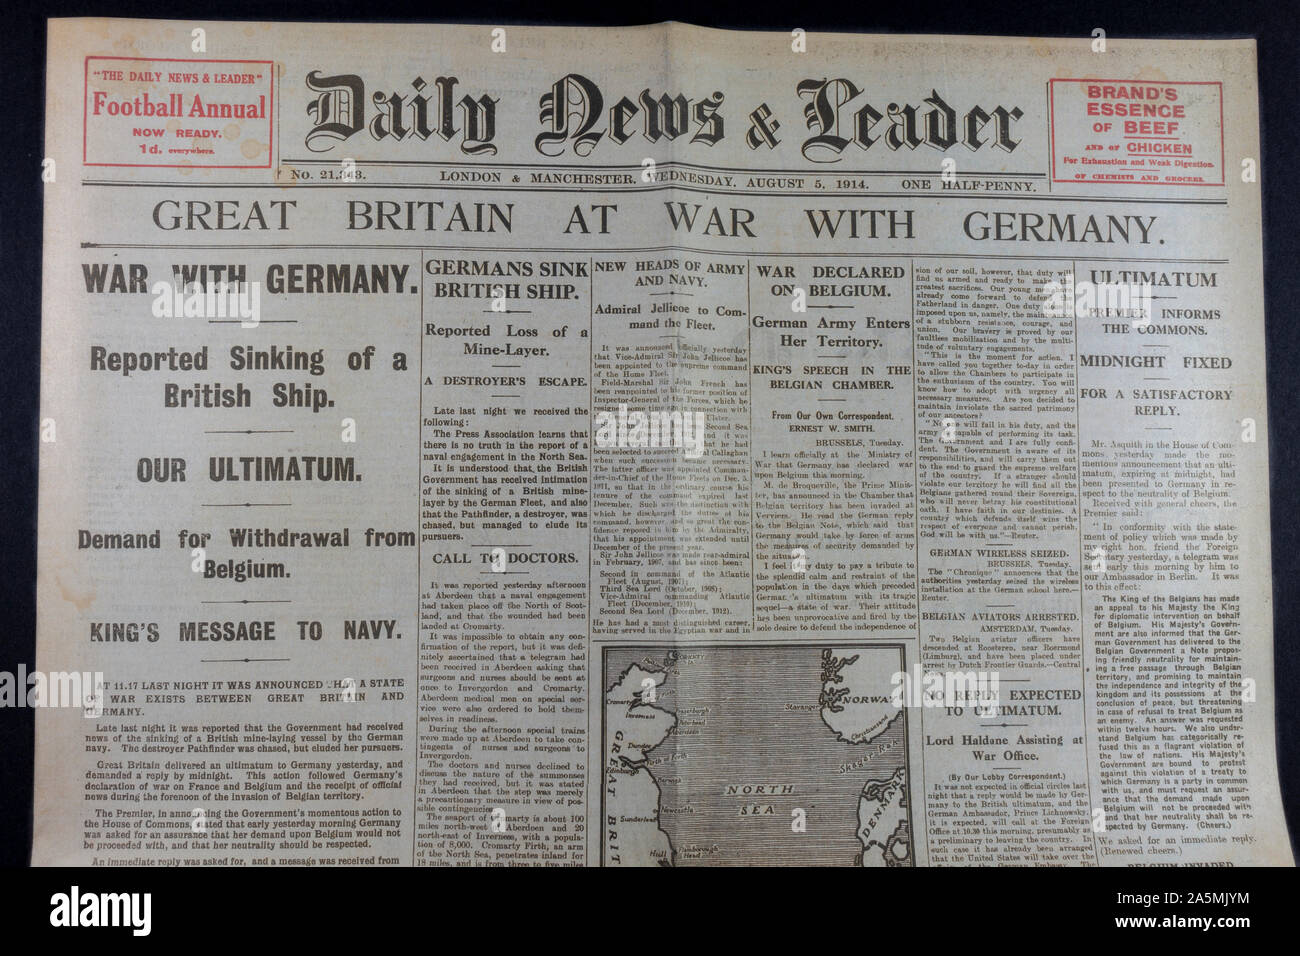 The Daily News & Reader newspaper on Wednesday 5th August 1914 announcing the start of World War One. Stock Photo